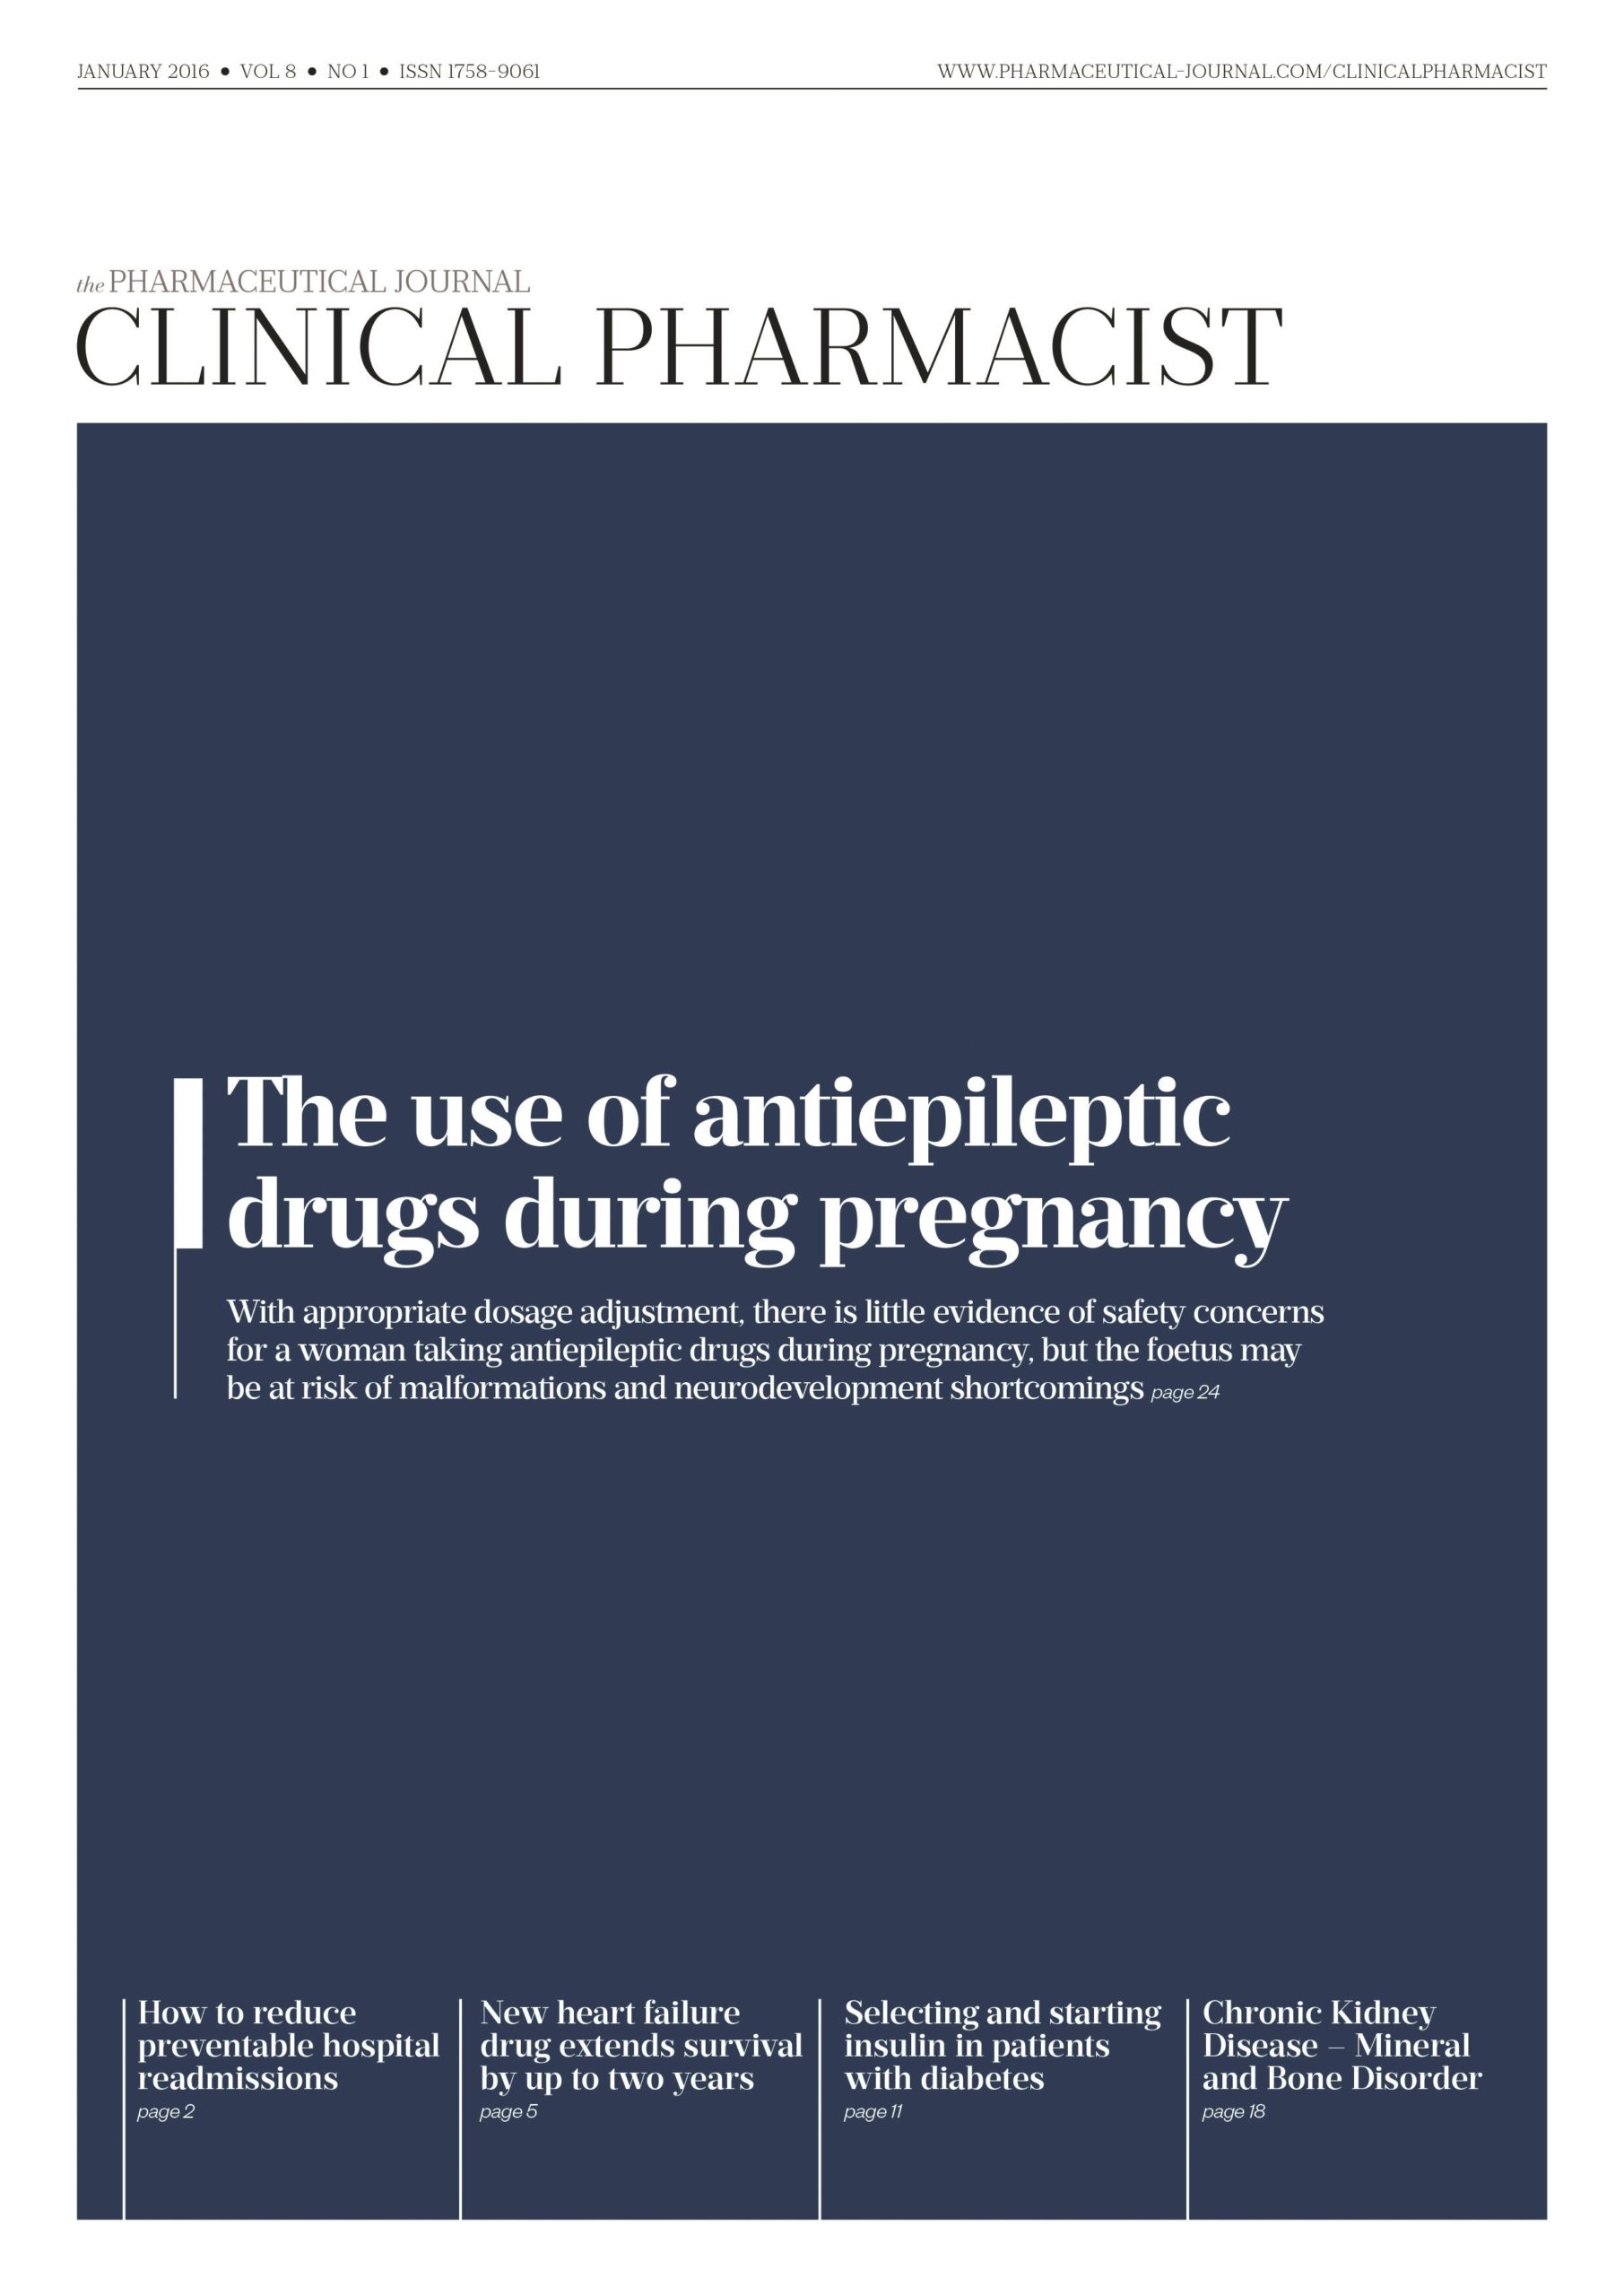 Publication issue cover for CP, January 2016, Vol 8, No 1